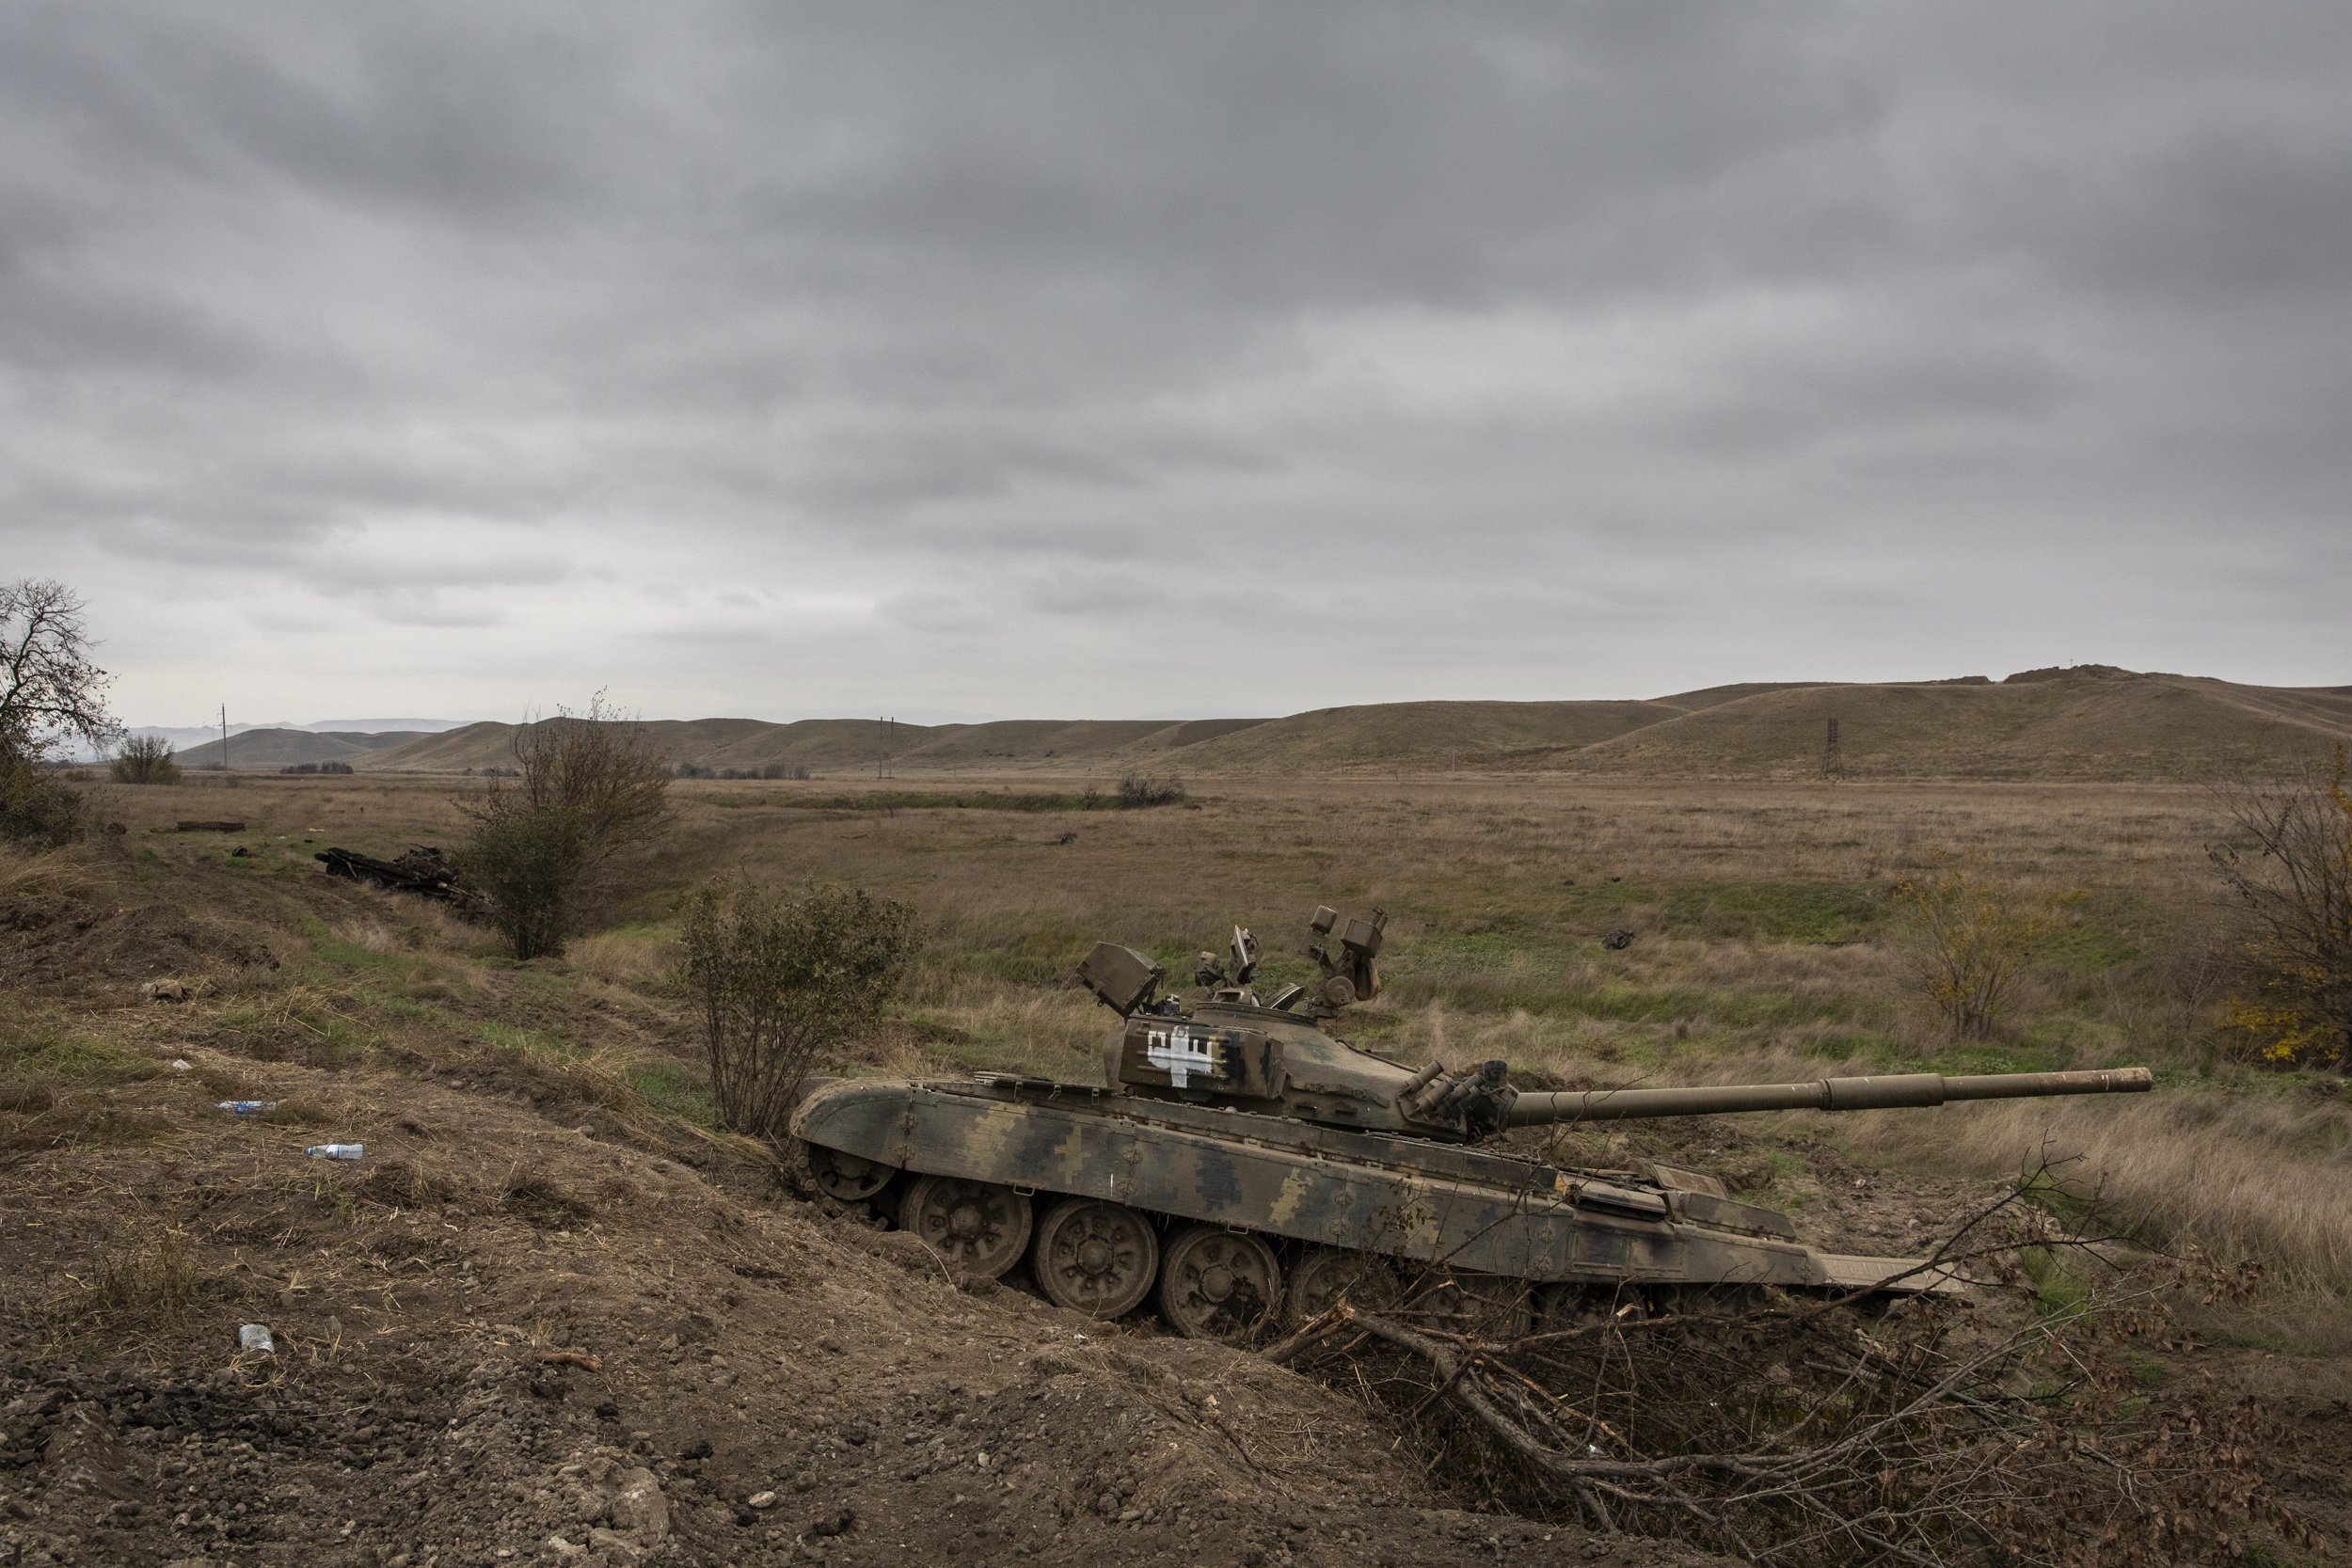  Destroyed Armenian tanks lay on the side of a road near the former frontline in the Fizuli region of Axerbaijan, that was retaken by Azeri forces after nearly 30 years of Armenian control. 